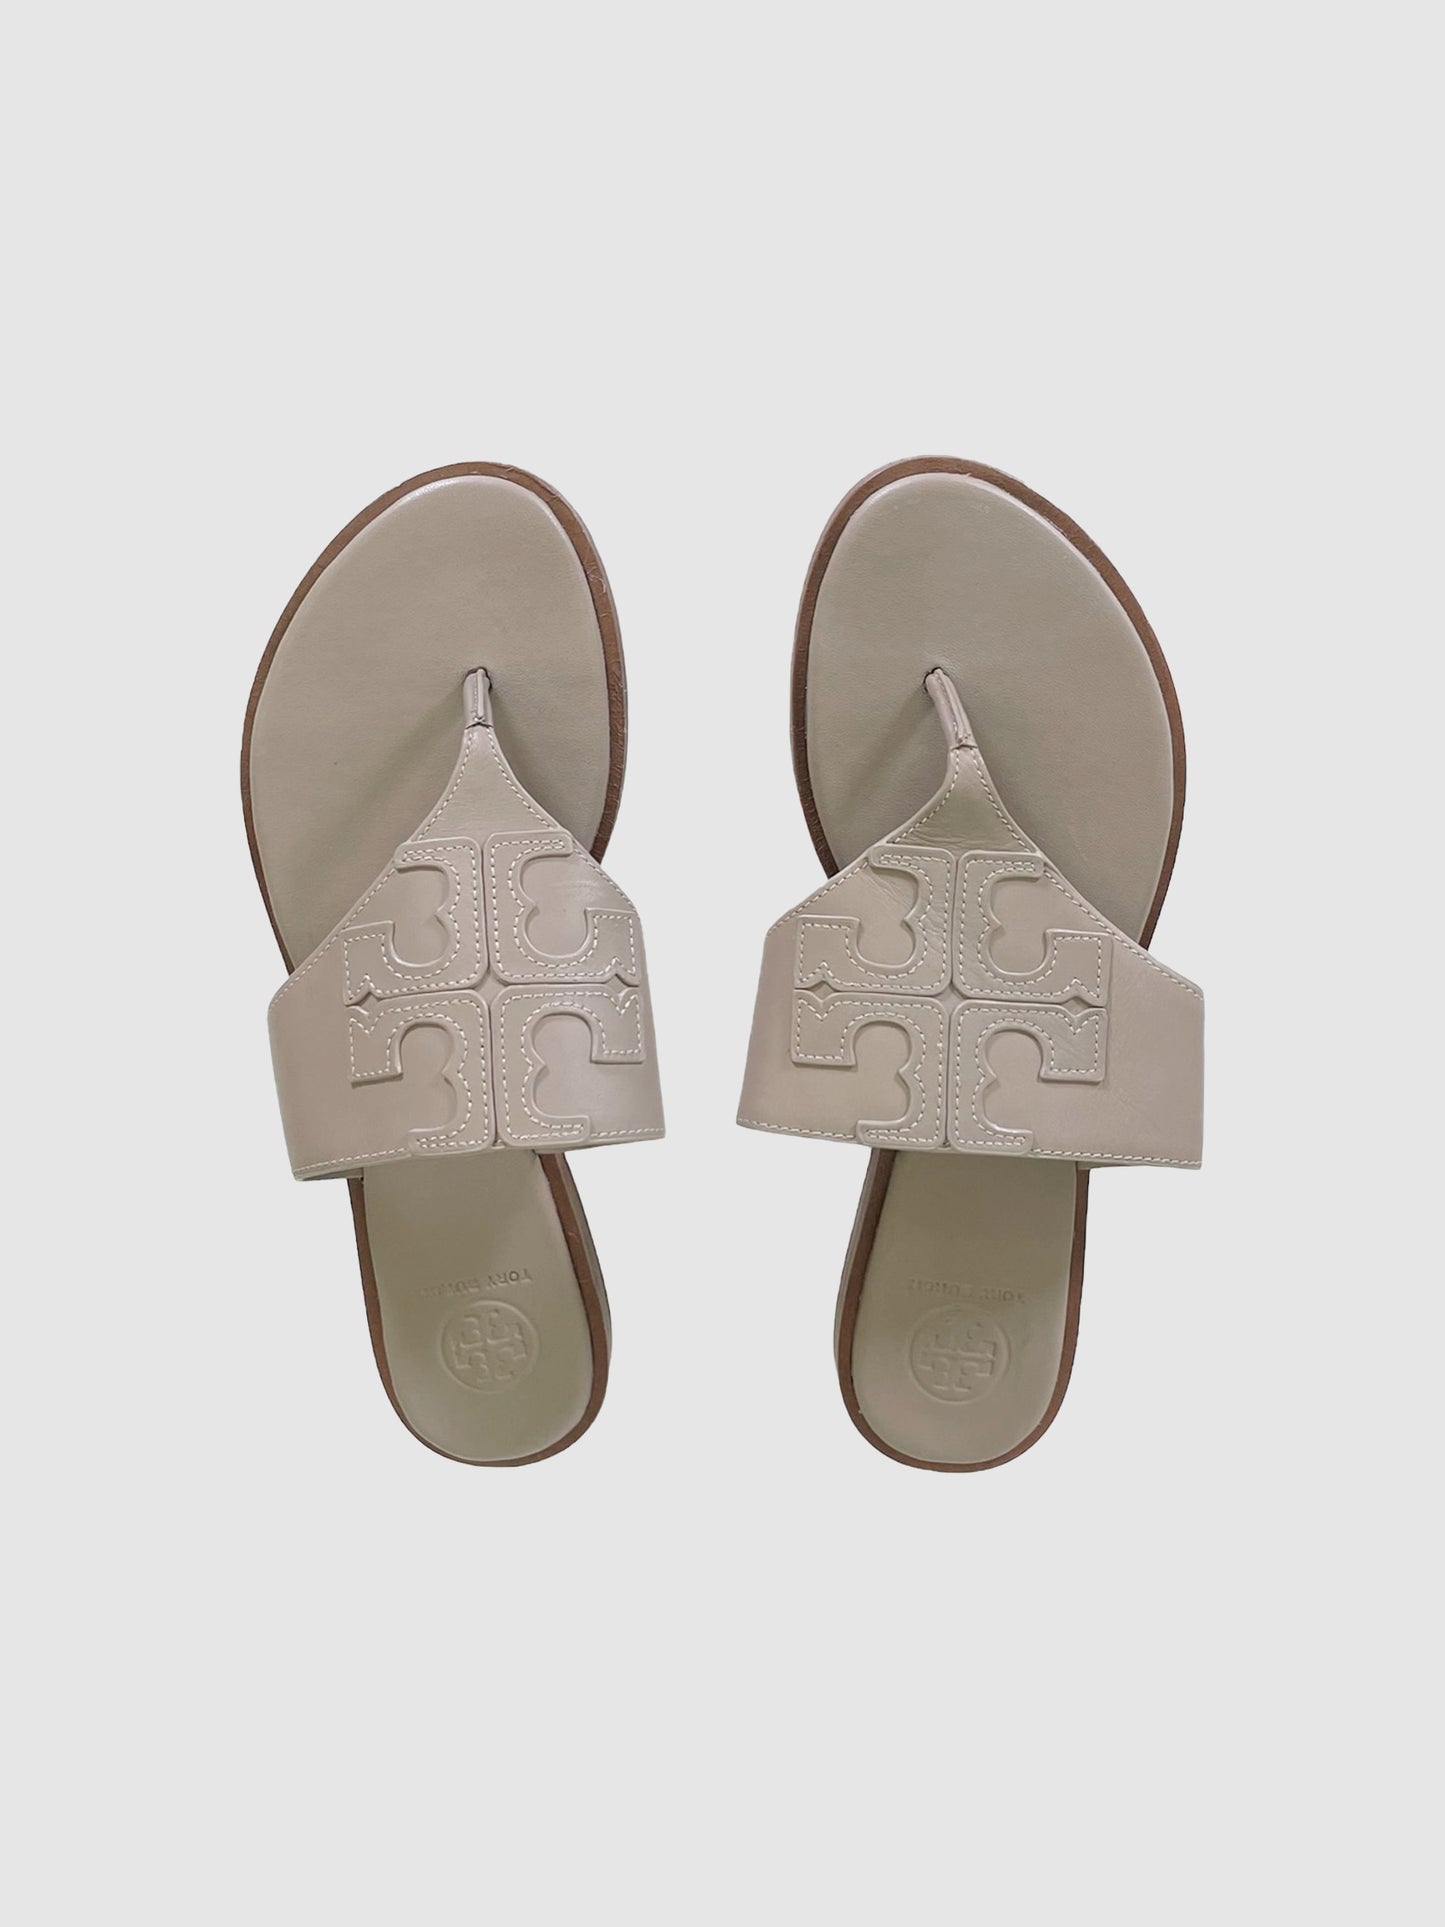 Tory Burch T-Strap Sandals - Size 8